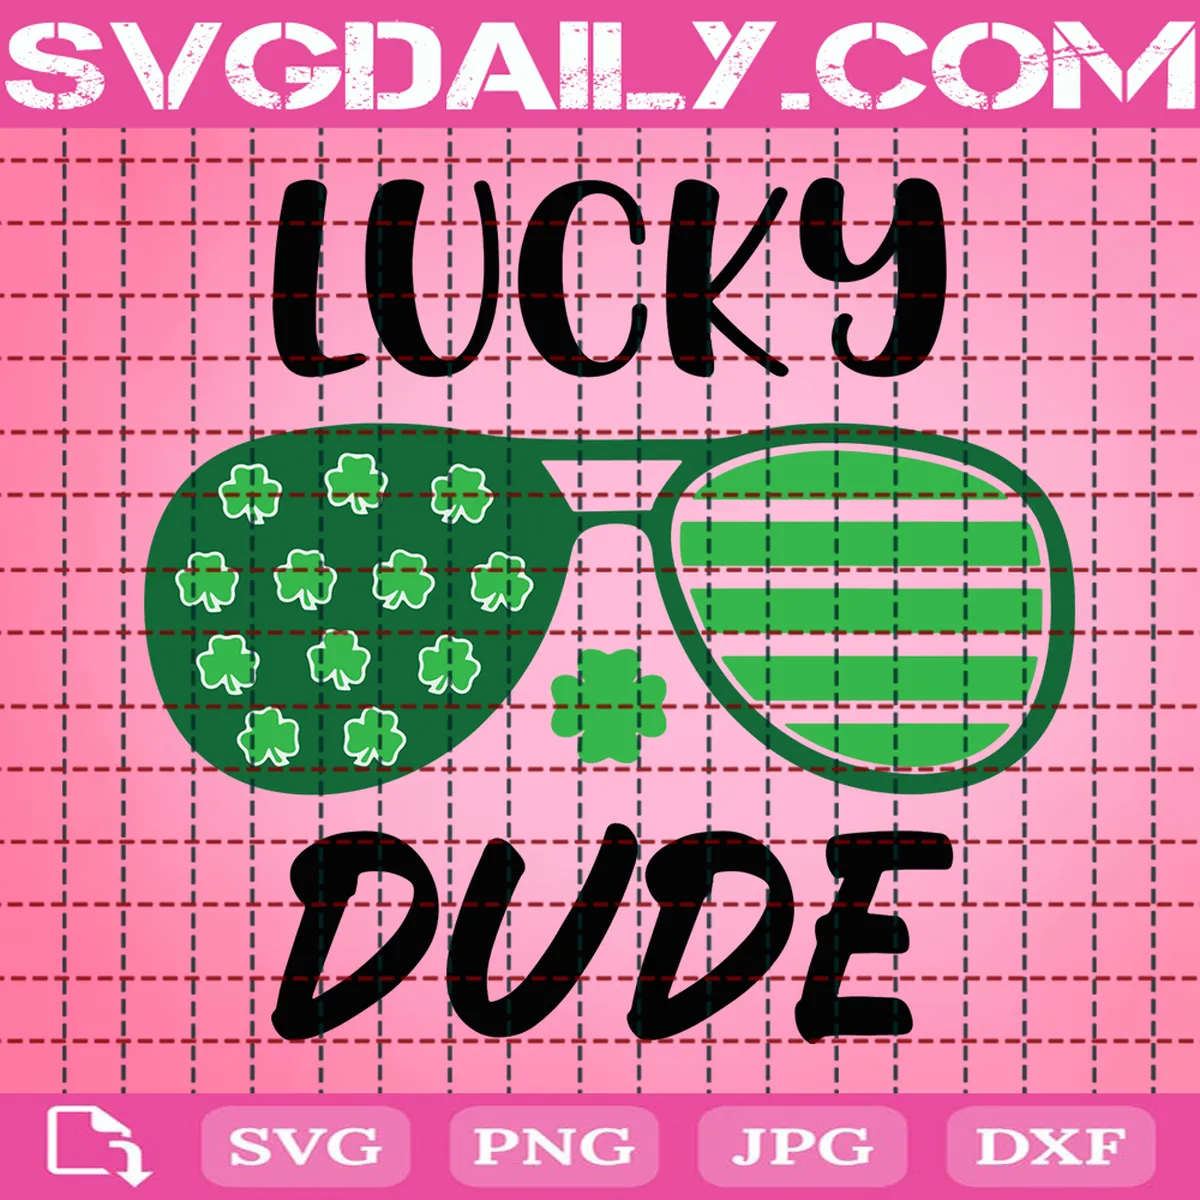 Lucky Dude Svg St Patricks Day Svg Daily Free Premium Svg Files